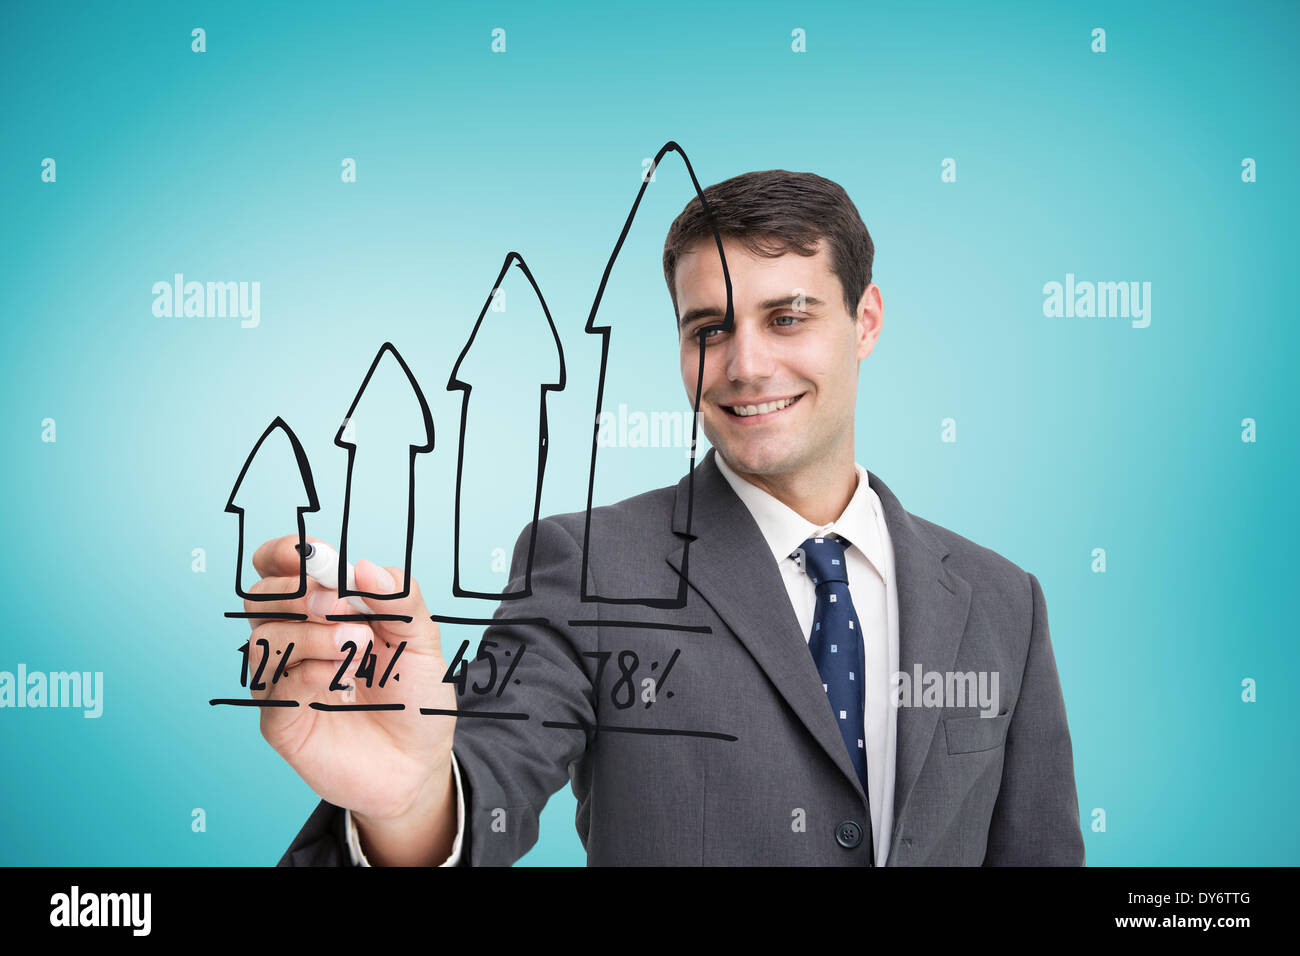 Composite image of businessman drawing graph Stock Photo